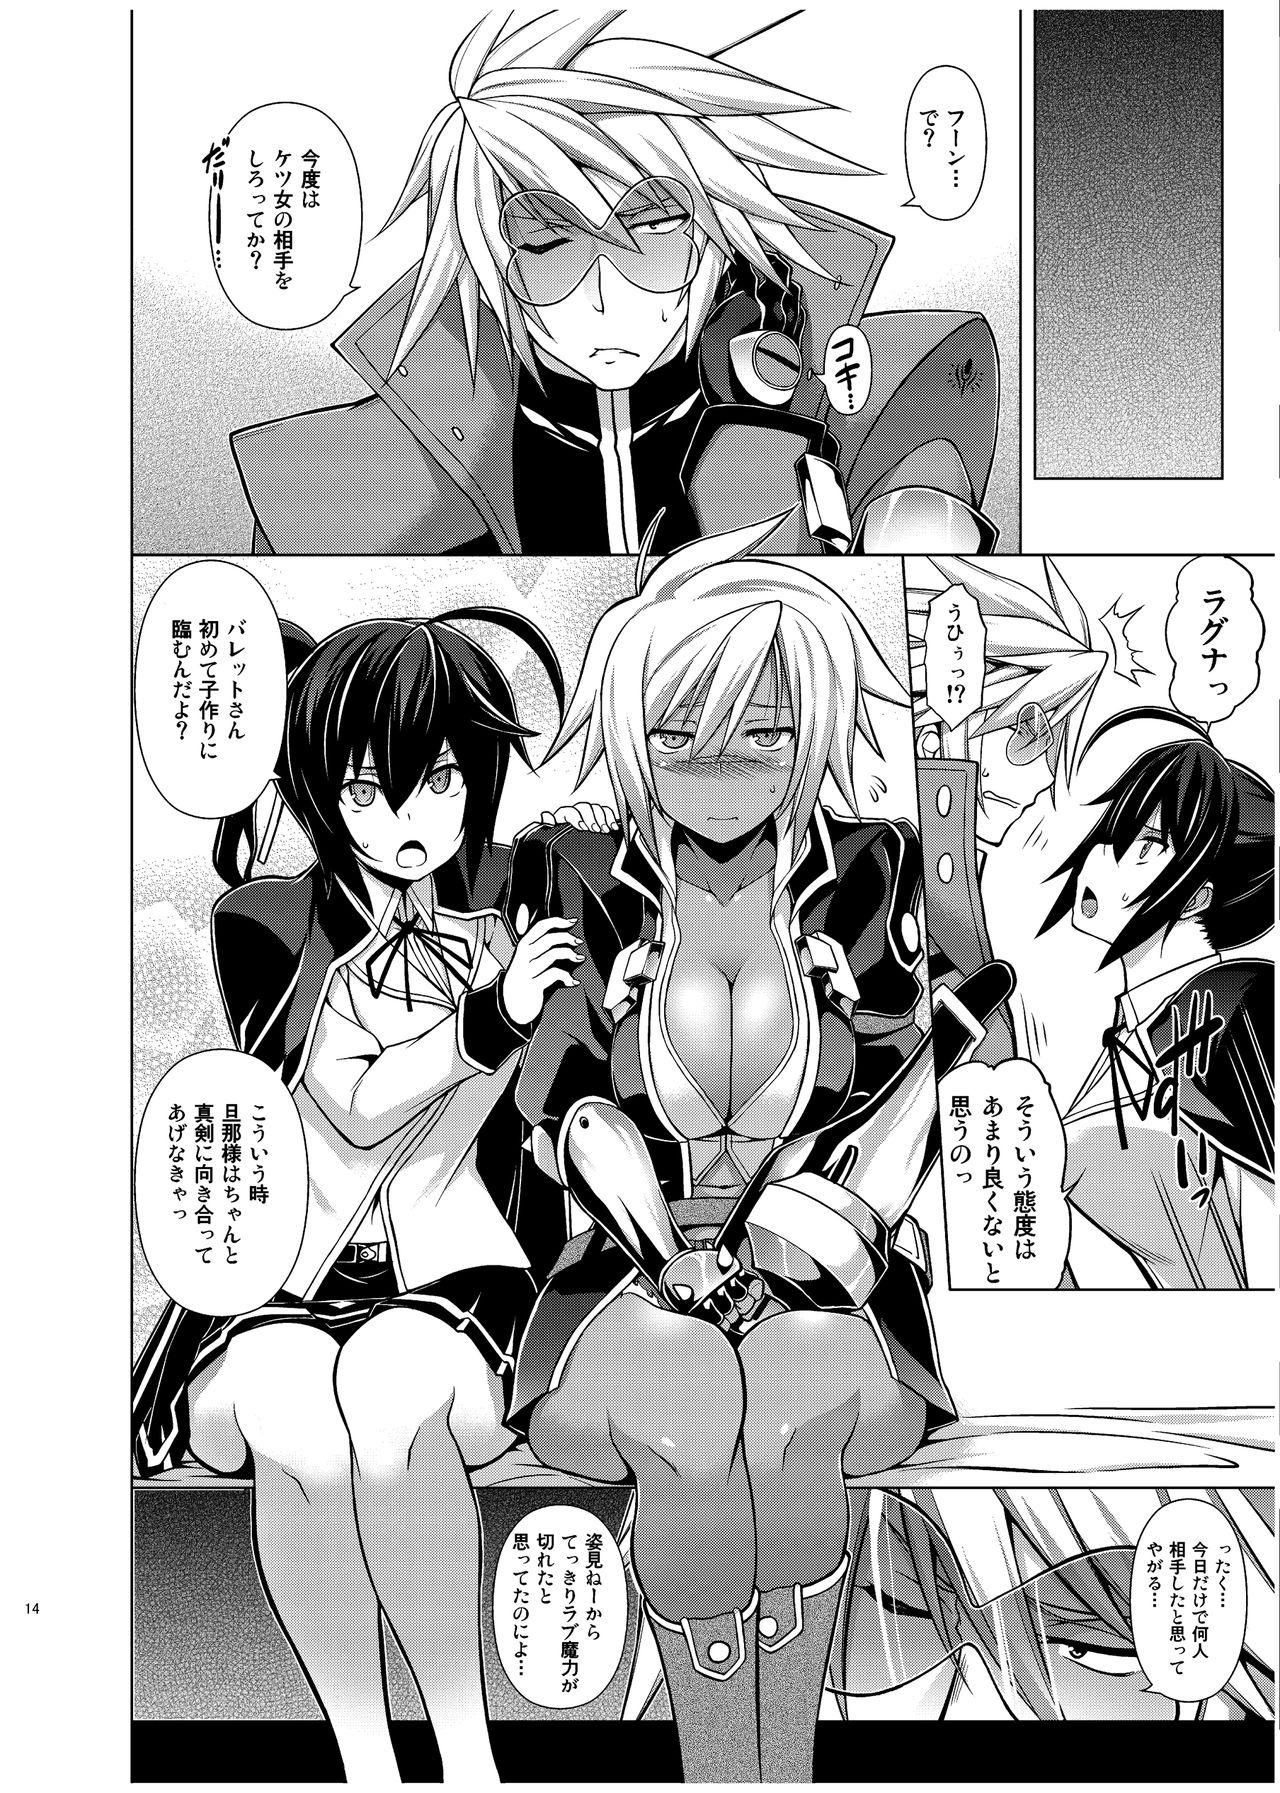 Foreplay BREAK BLUE X MARRIAGE - Blazblue Blowing - Page 13